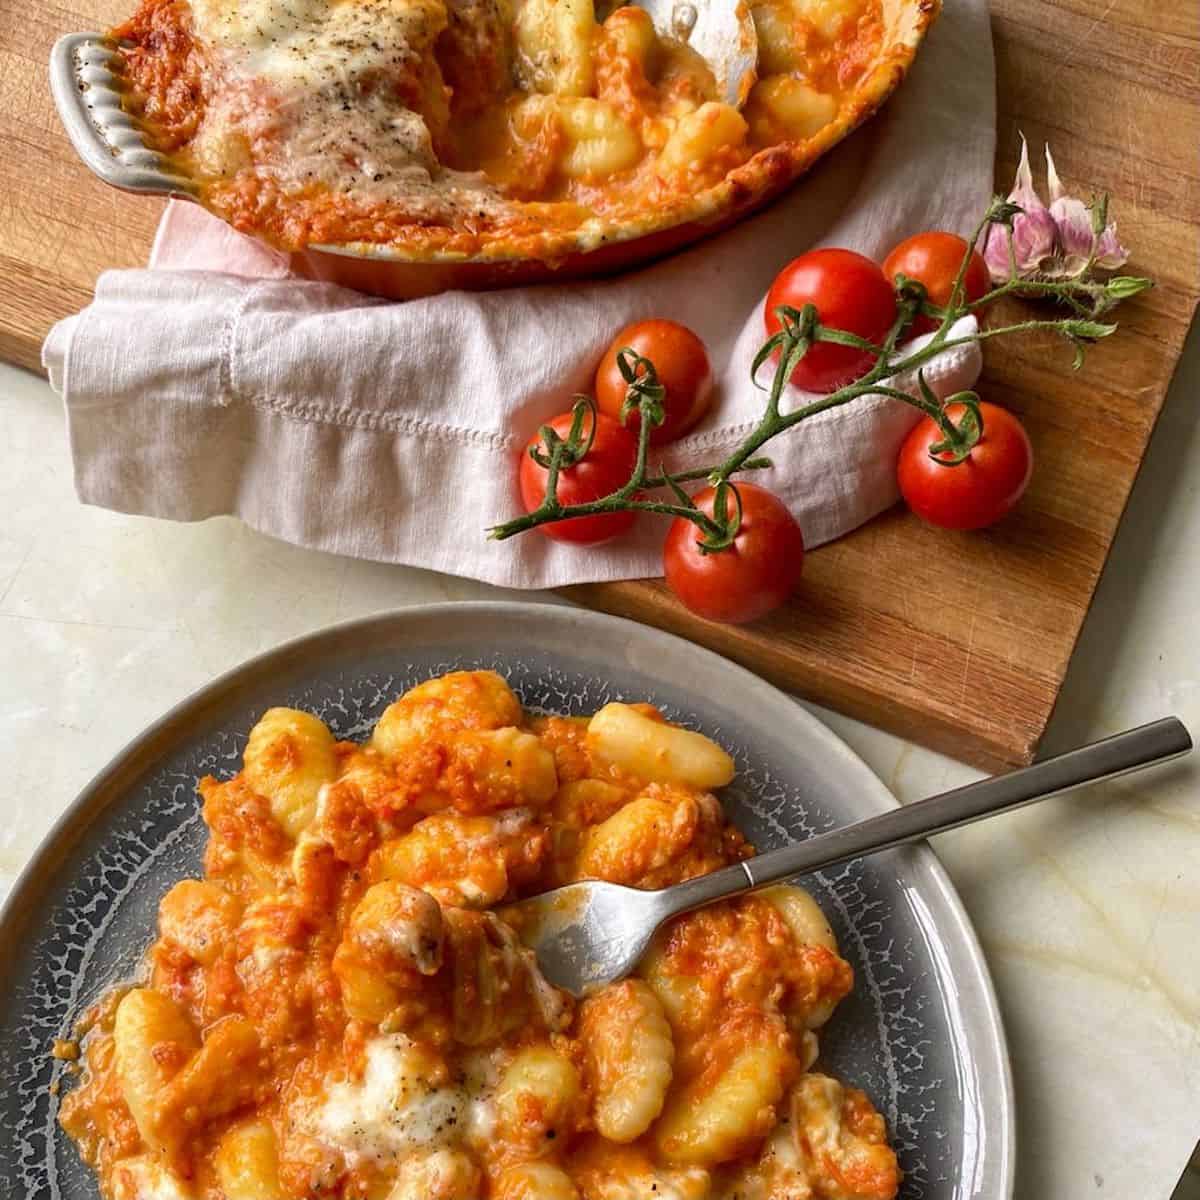 Gnocchi Al Forno covered in melted cheese 